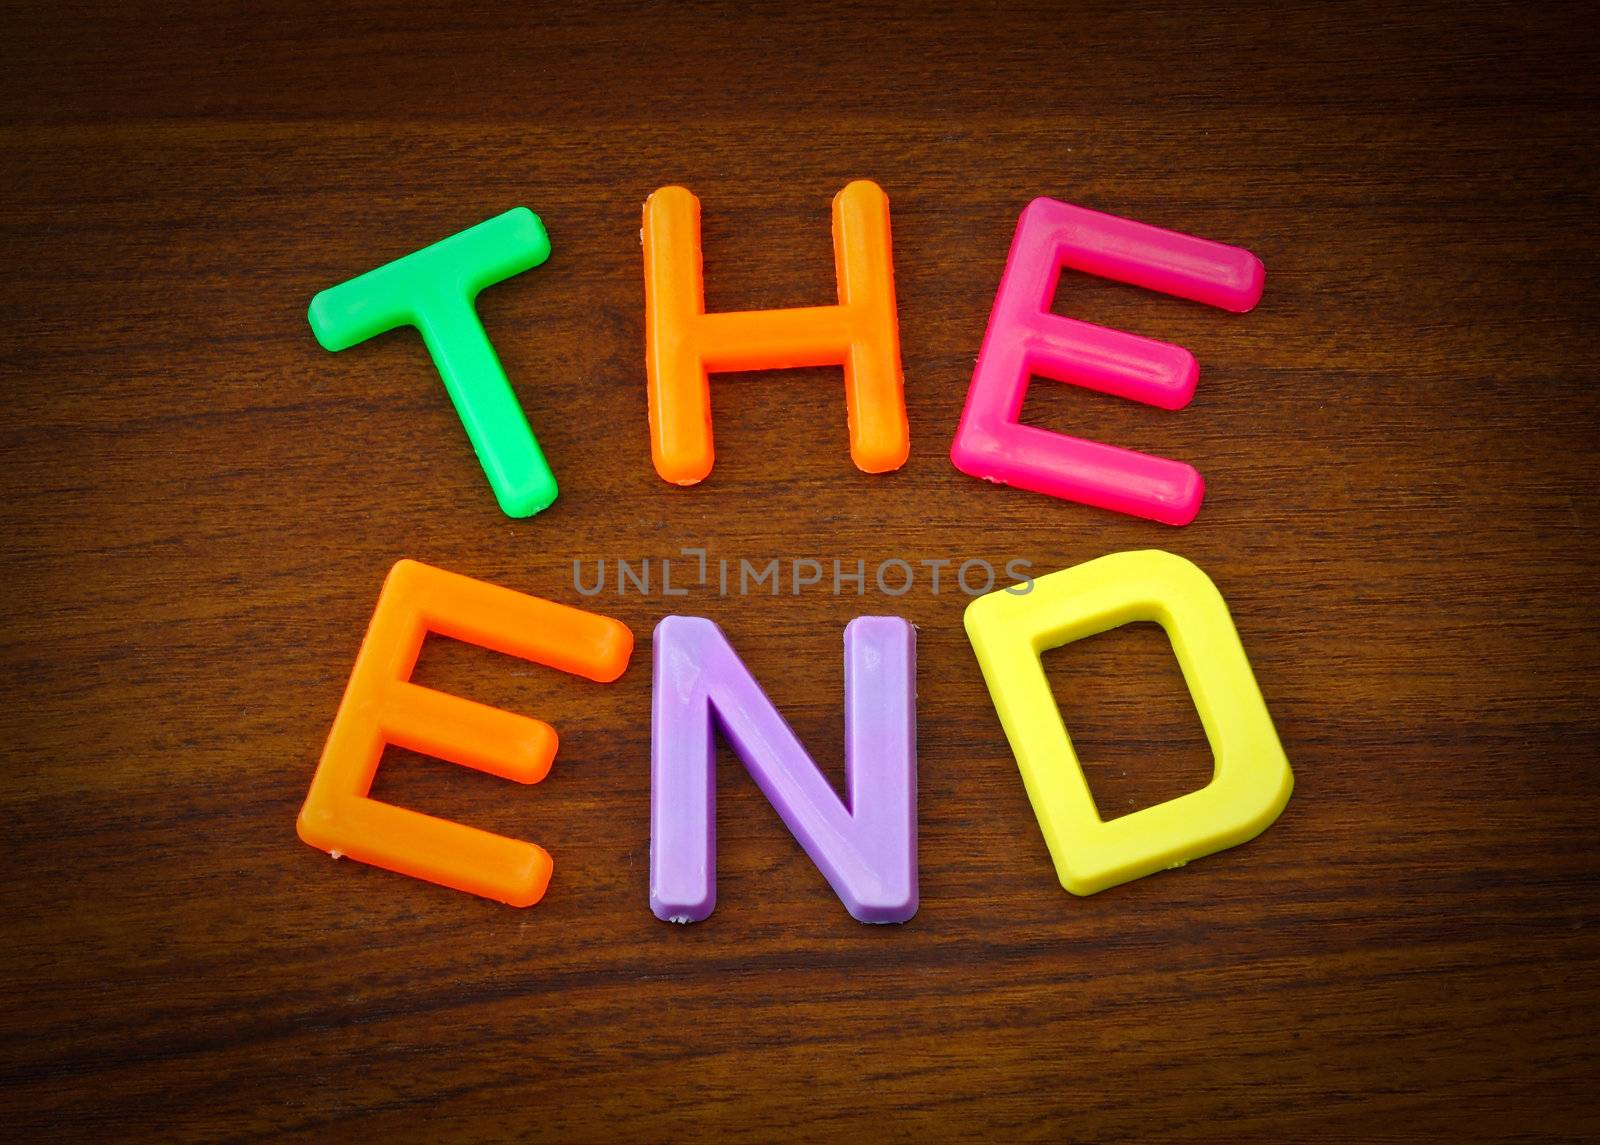 The end in colorful toy letters on wood background